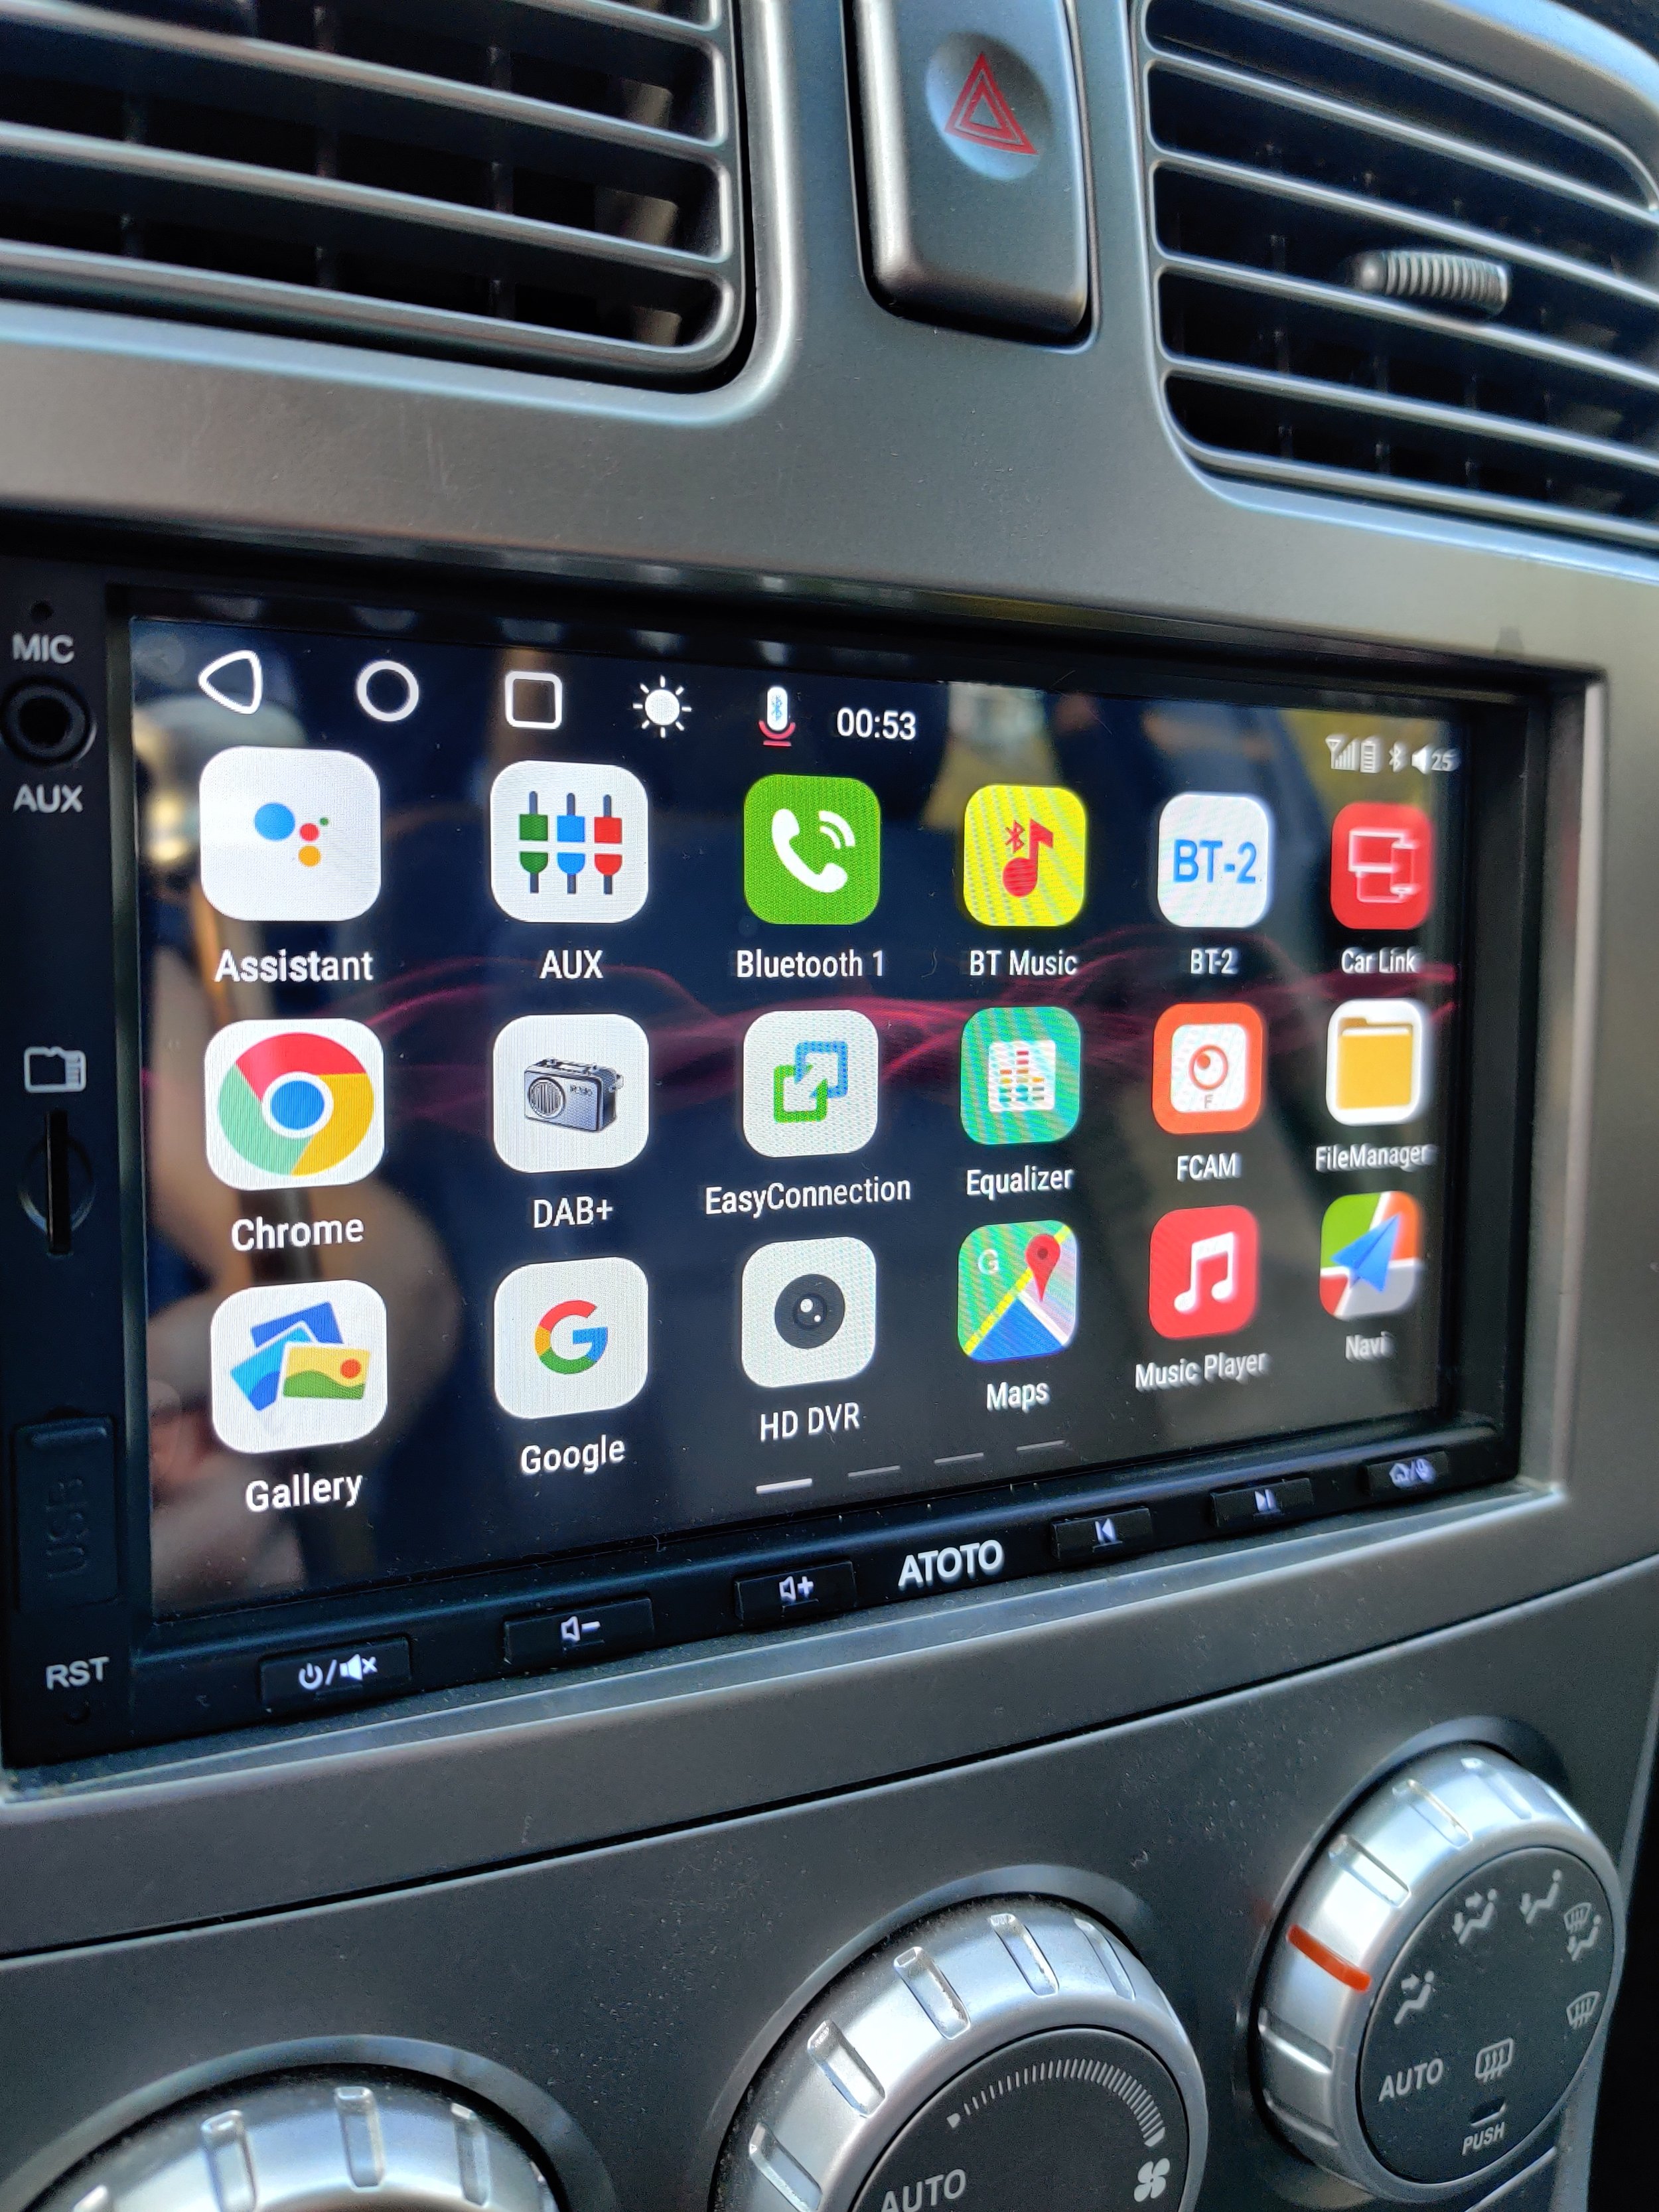 Atoto S8 Gen2 android head unit. Still pumping out the jams after six  months? — Blingstrom